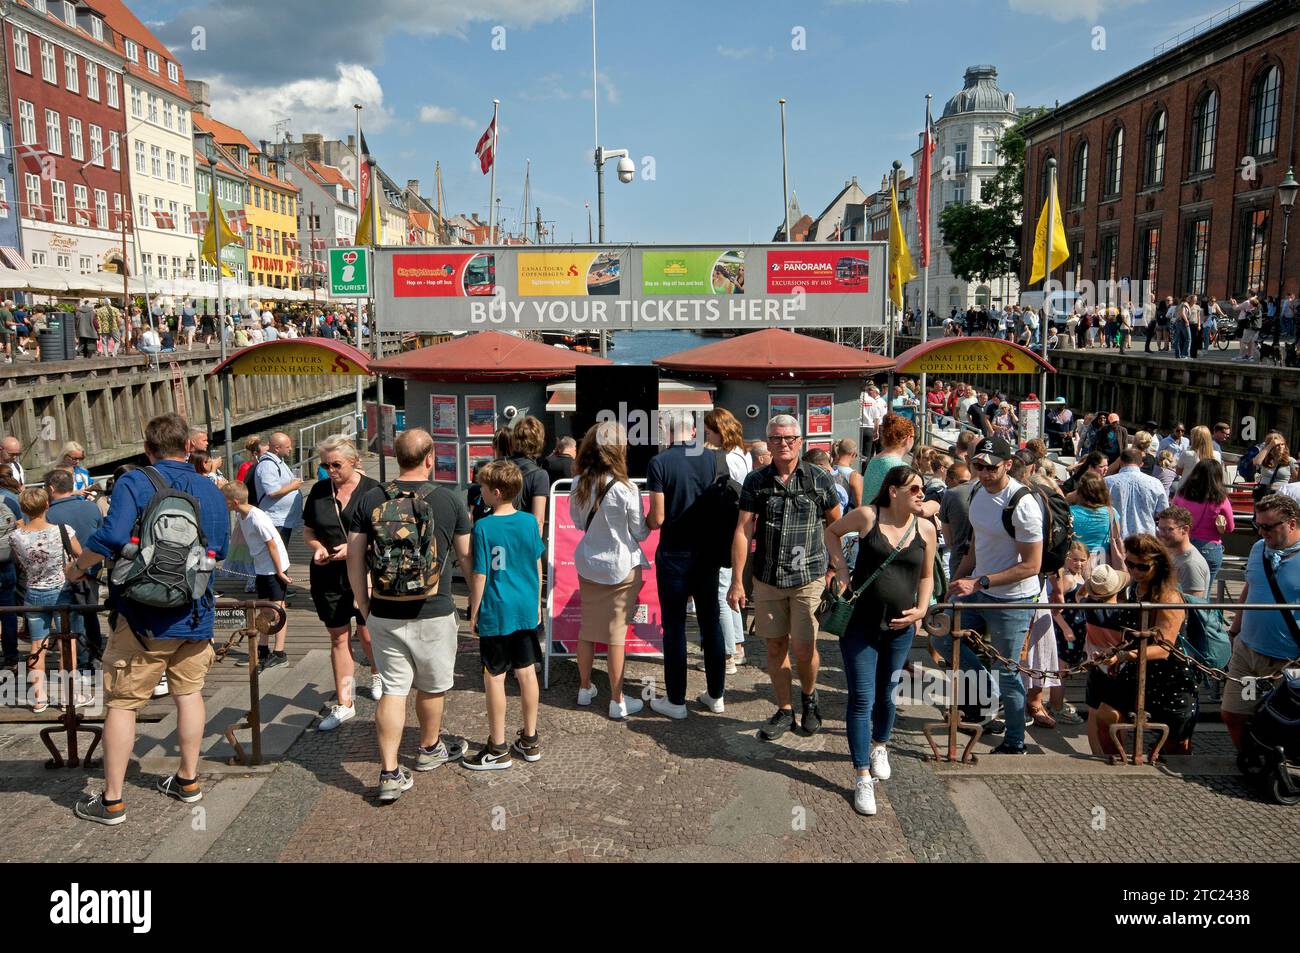 Crowd of tourists at ticket office for sightseeing boat tours, Nyhavn canal, Copenhagen, Denmark Stock Photo